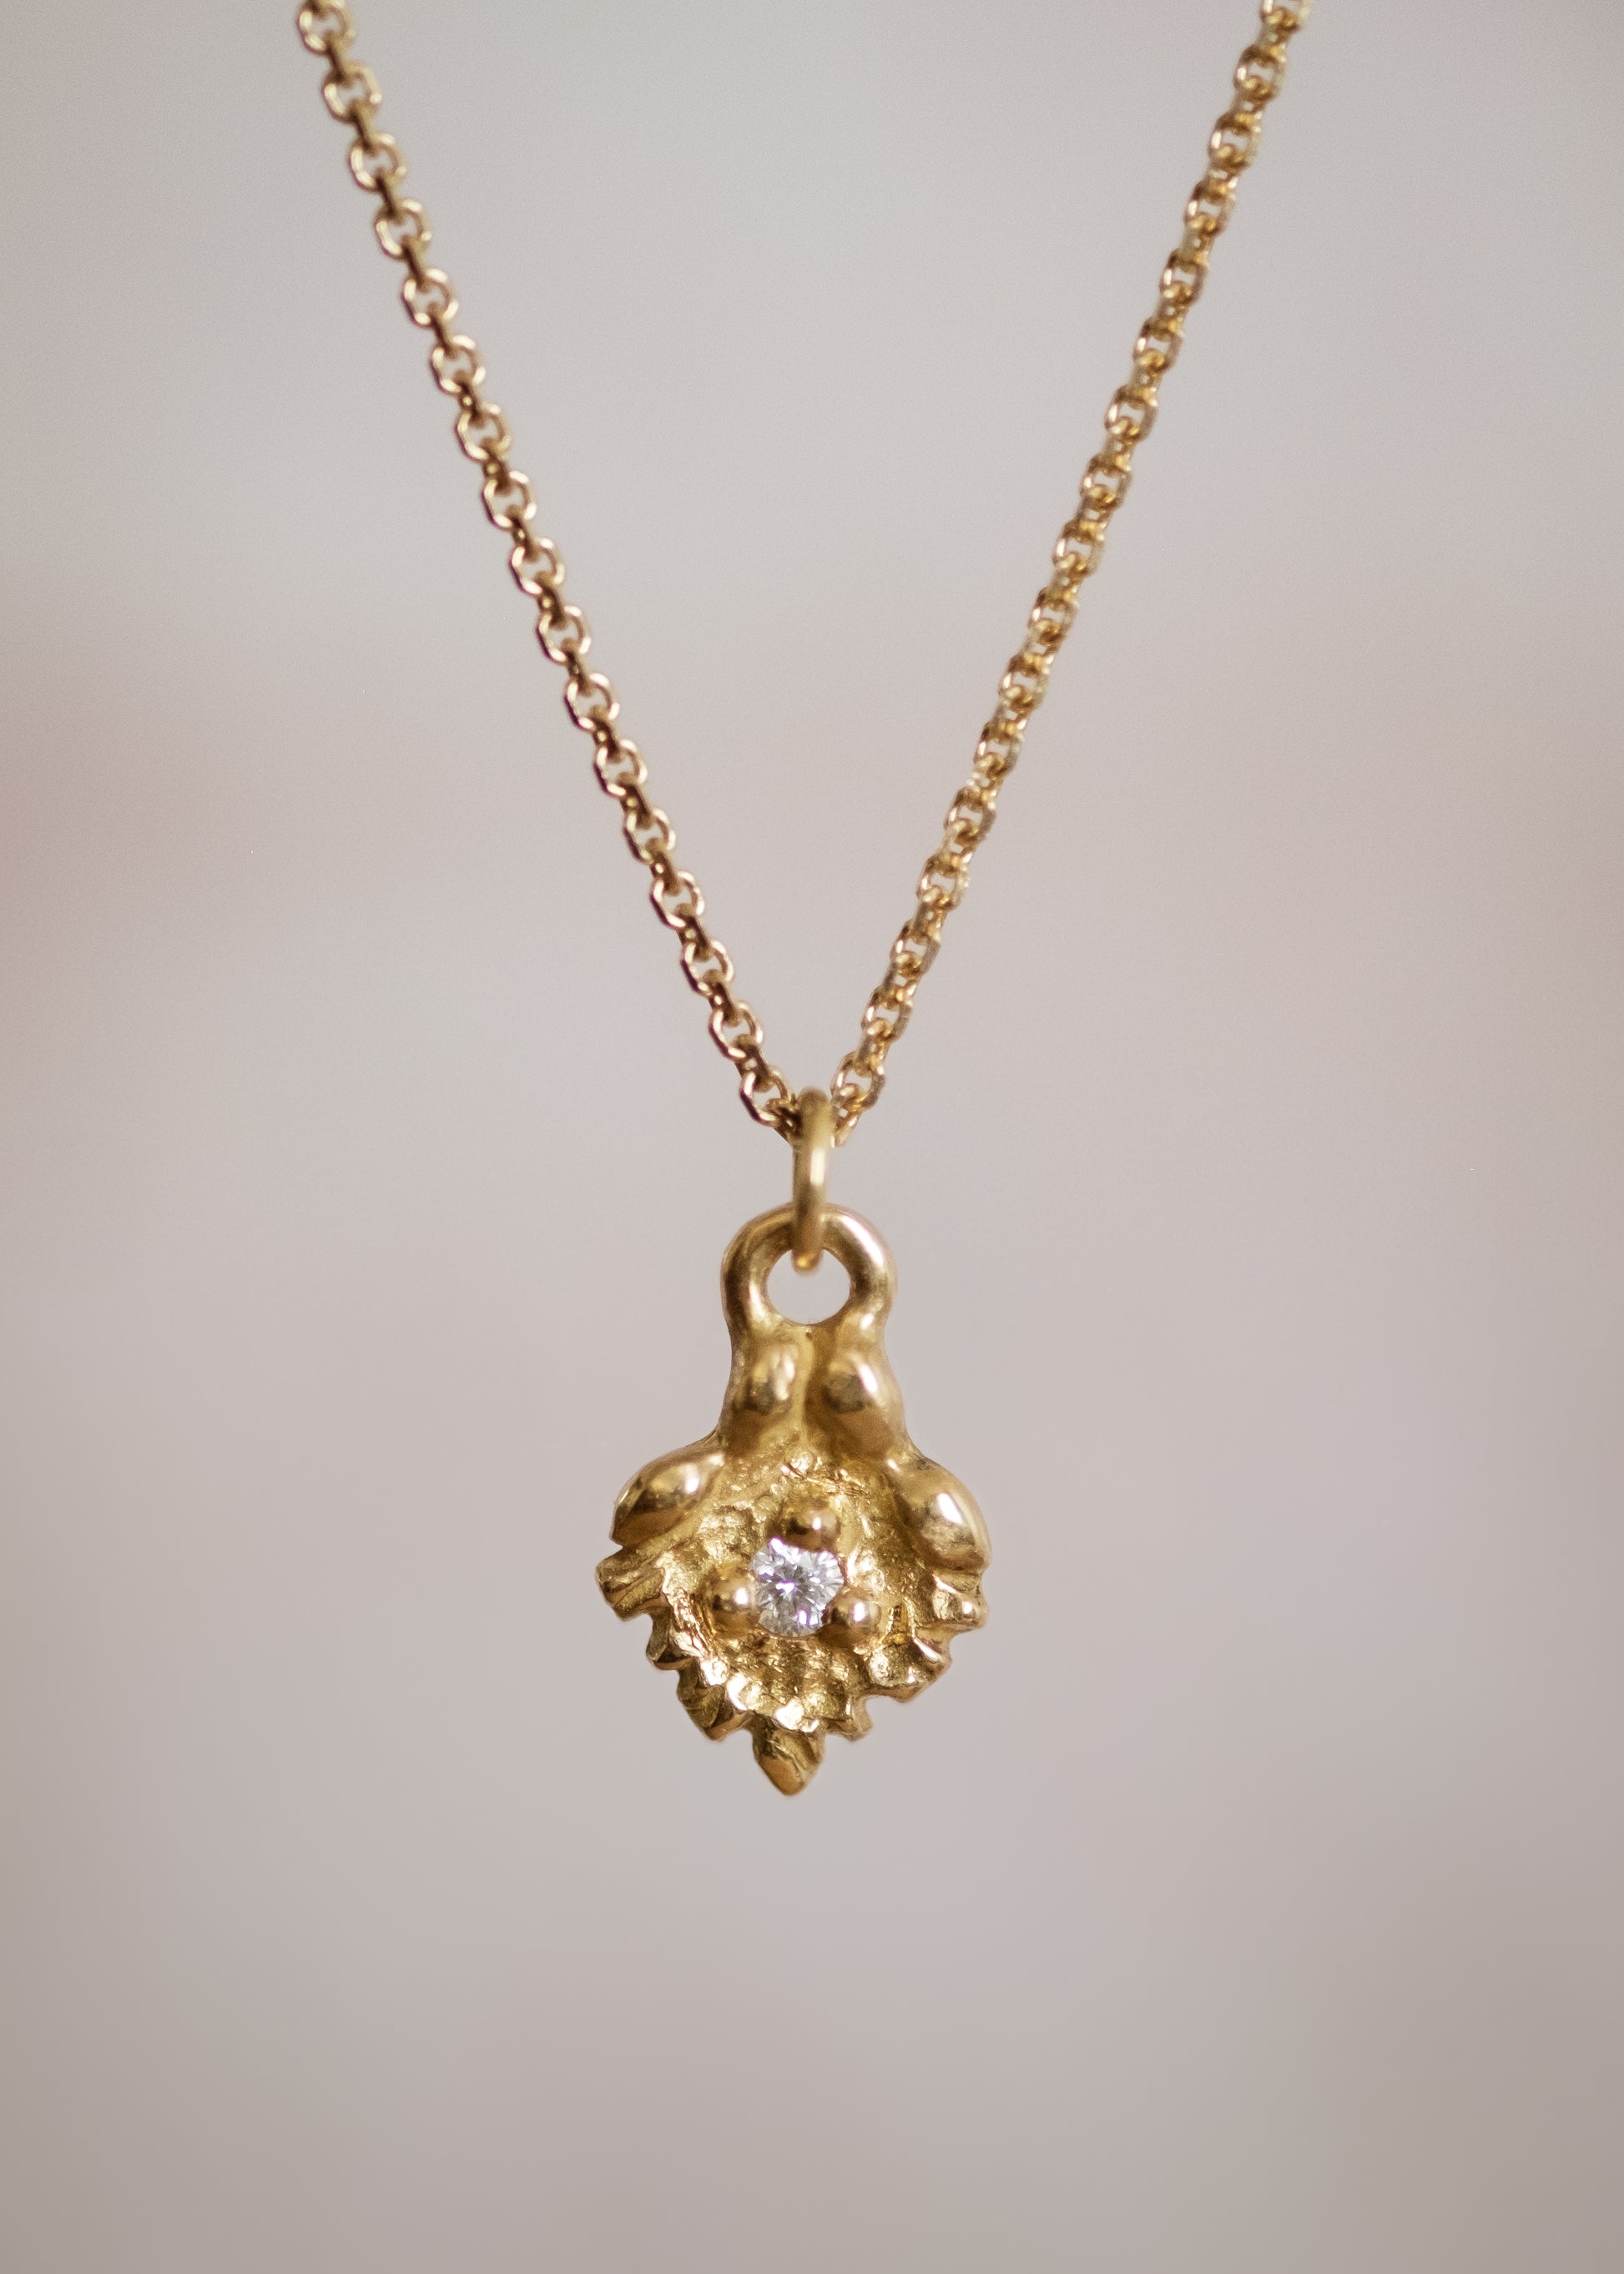 Like a small cabin nestled in the verdant mountainside of the Swiss Alps, the Chalet necklace invites a sense of wanderlust and adventure. Intricate textures give way to a single diamond that sparkles brilliantly against the gold that surrounds it—a snow-capped mountain top gleaming under the radiant warmth of the sun. 